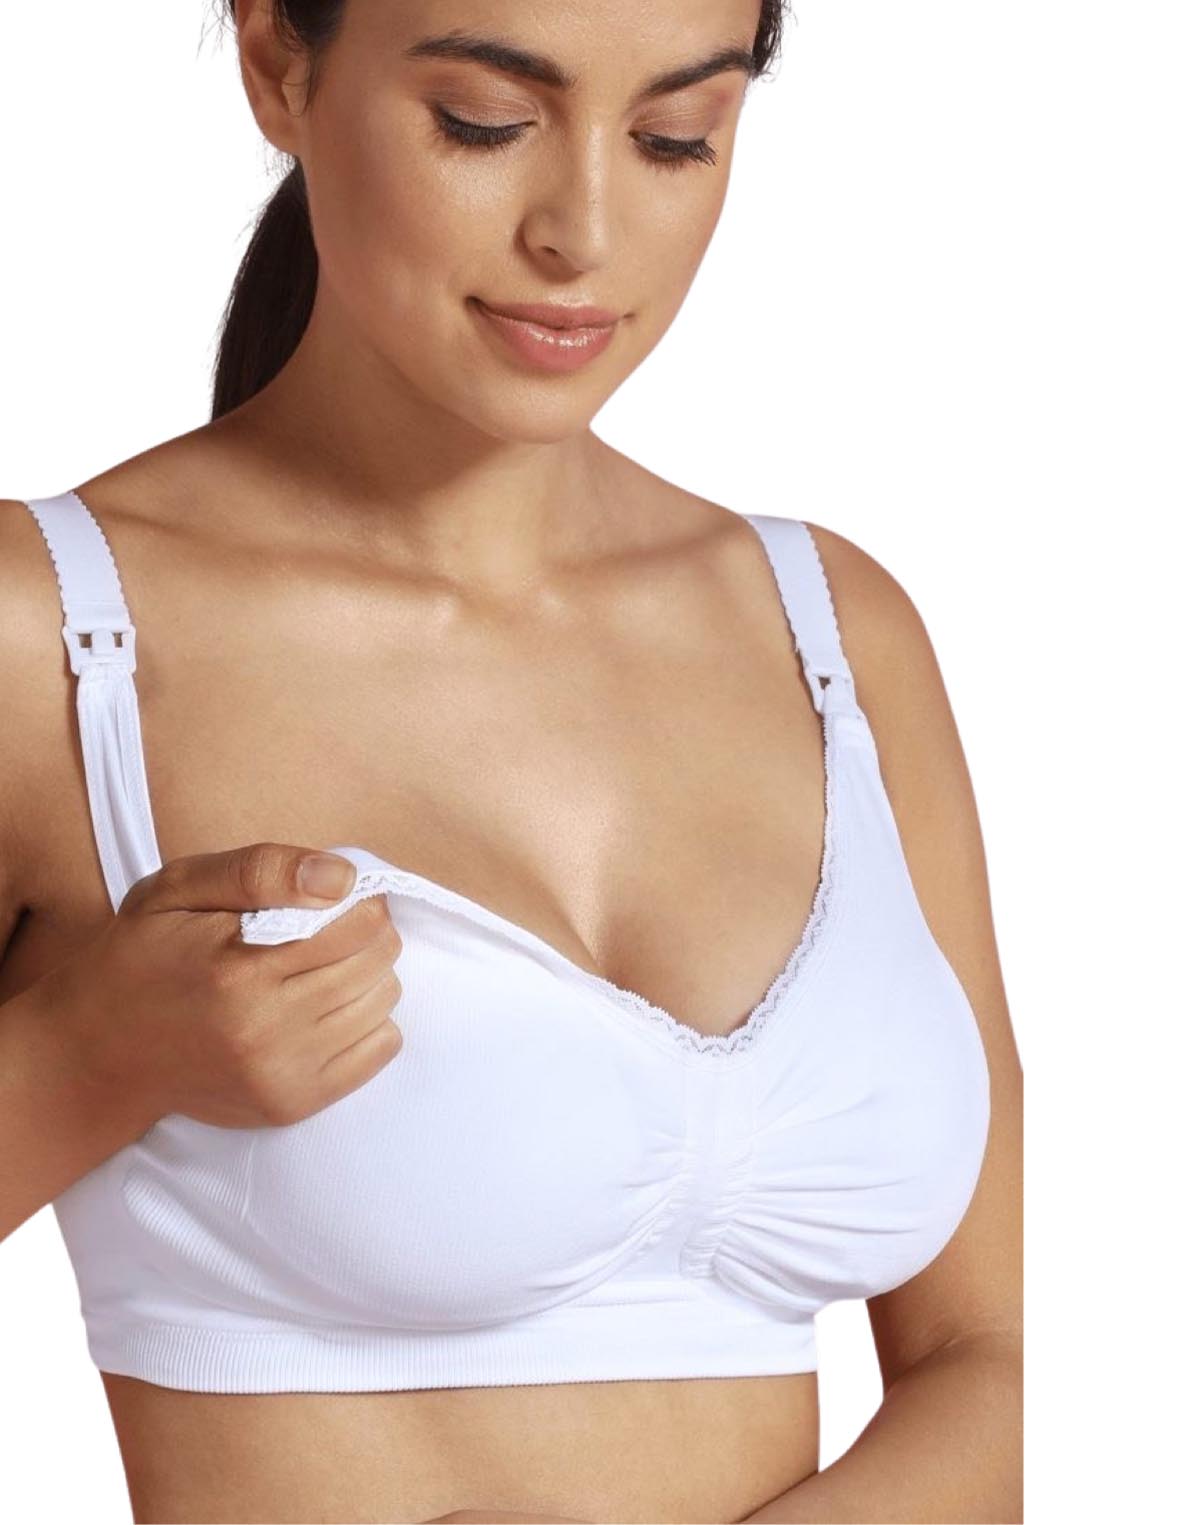 Carriwell - Maternity & Nursing Bra with Padded Carri-Gel support The Carriwell  Maternity and Nursing Bra with Padded Carri-Gel support is designed for  fuller breasts and curves, this patented “seamless” nursing bra